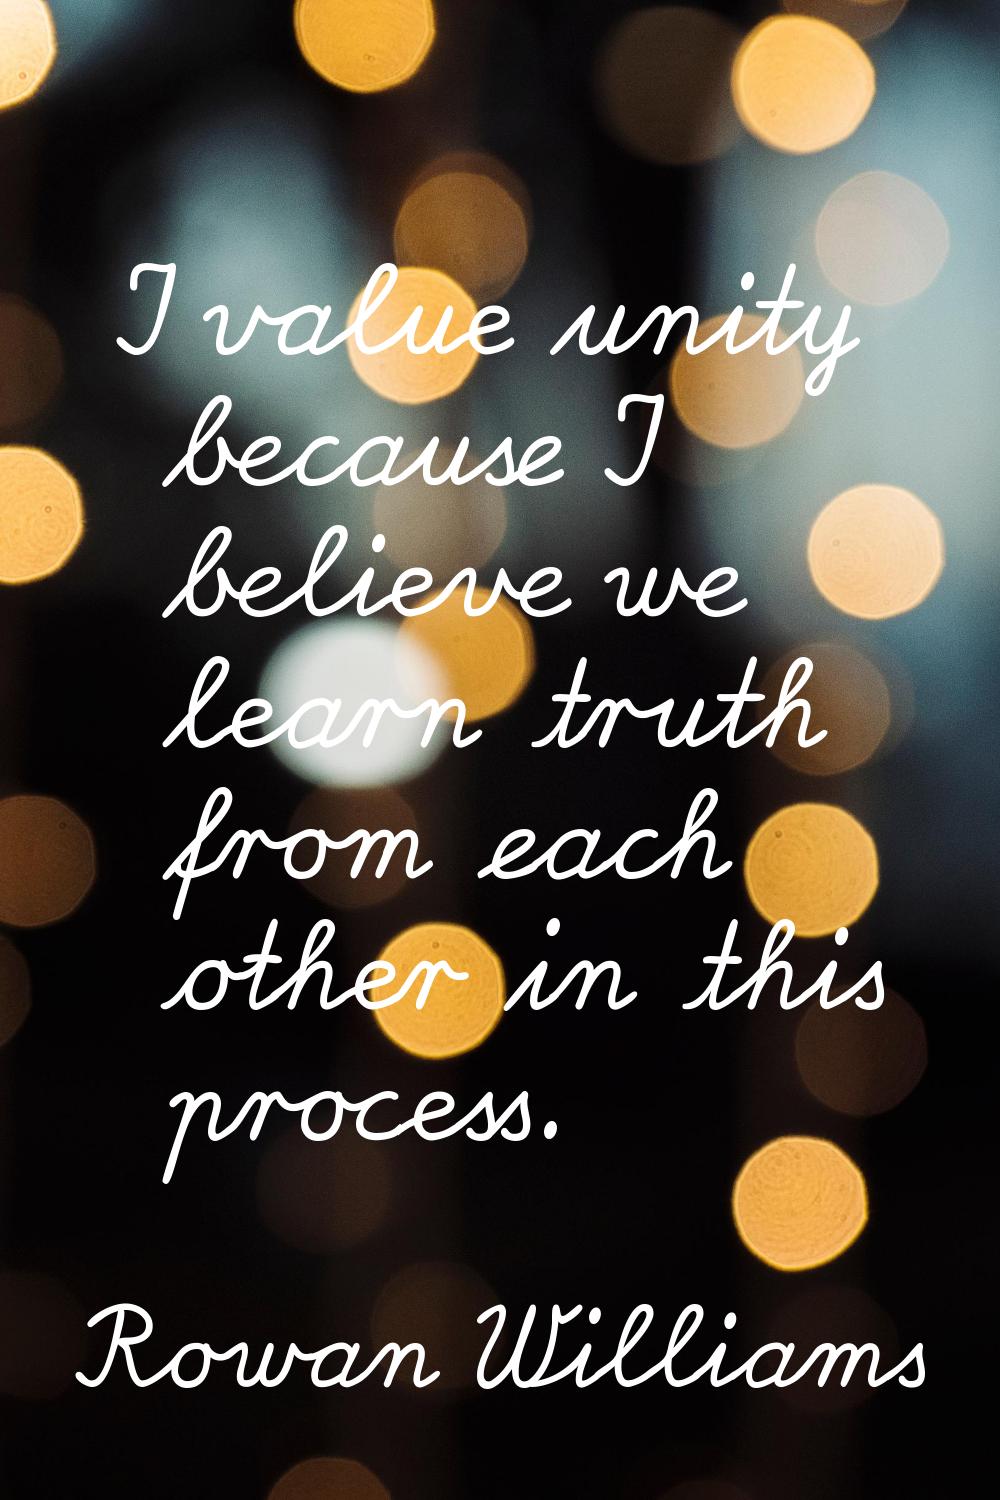 I value unity because I believe we learn truth from each other in this process.